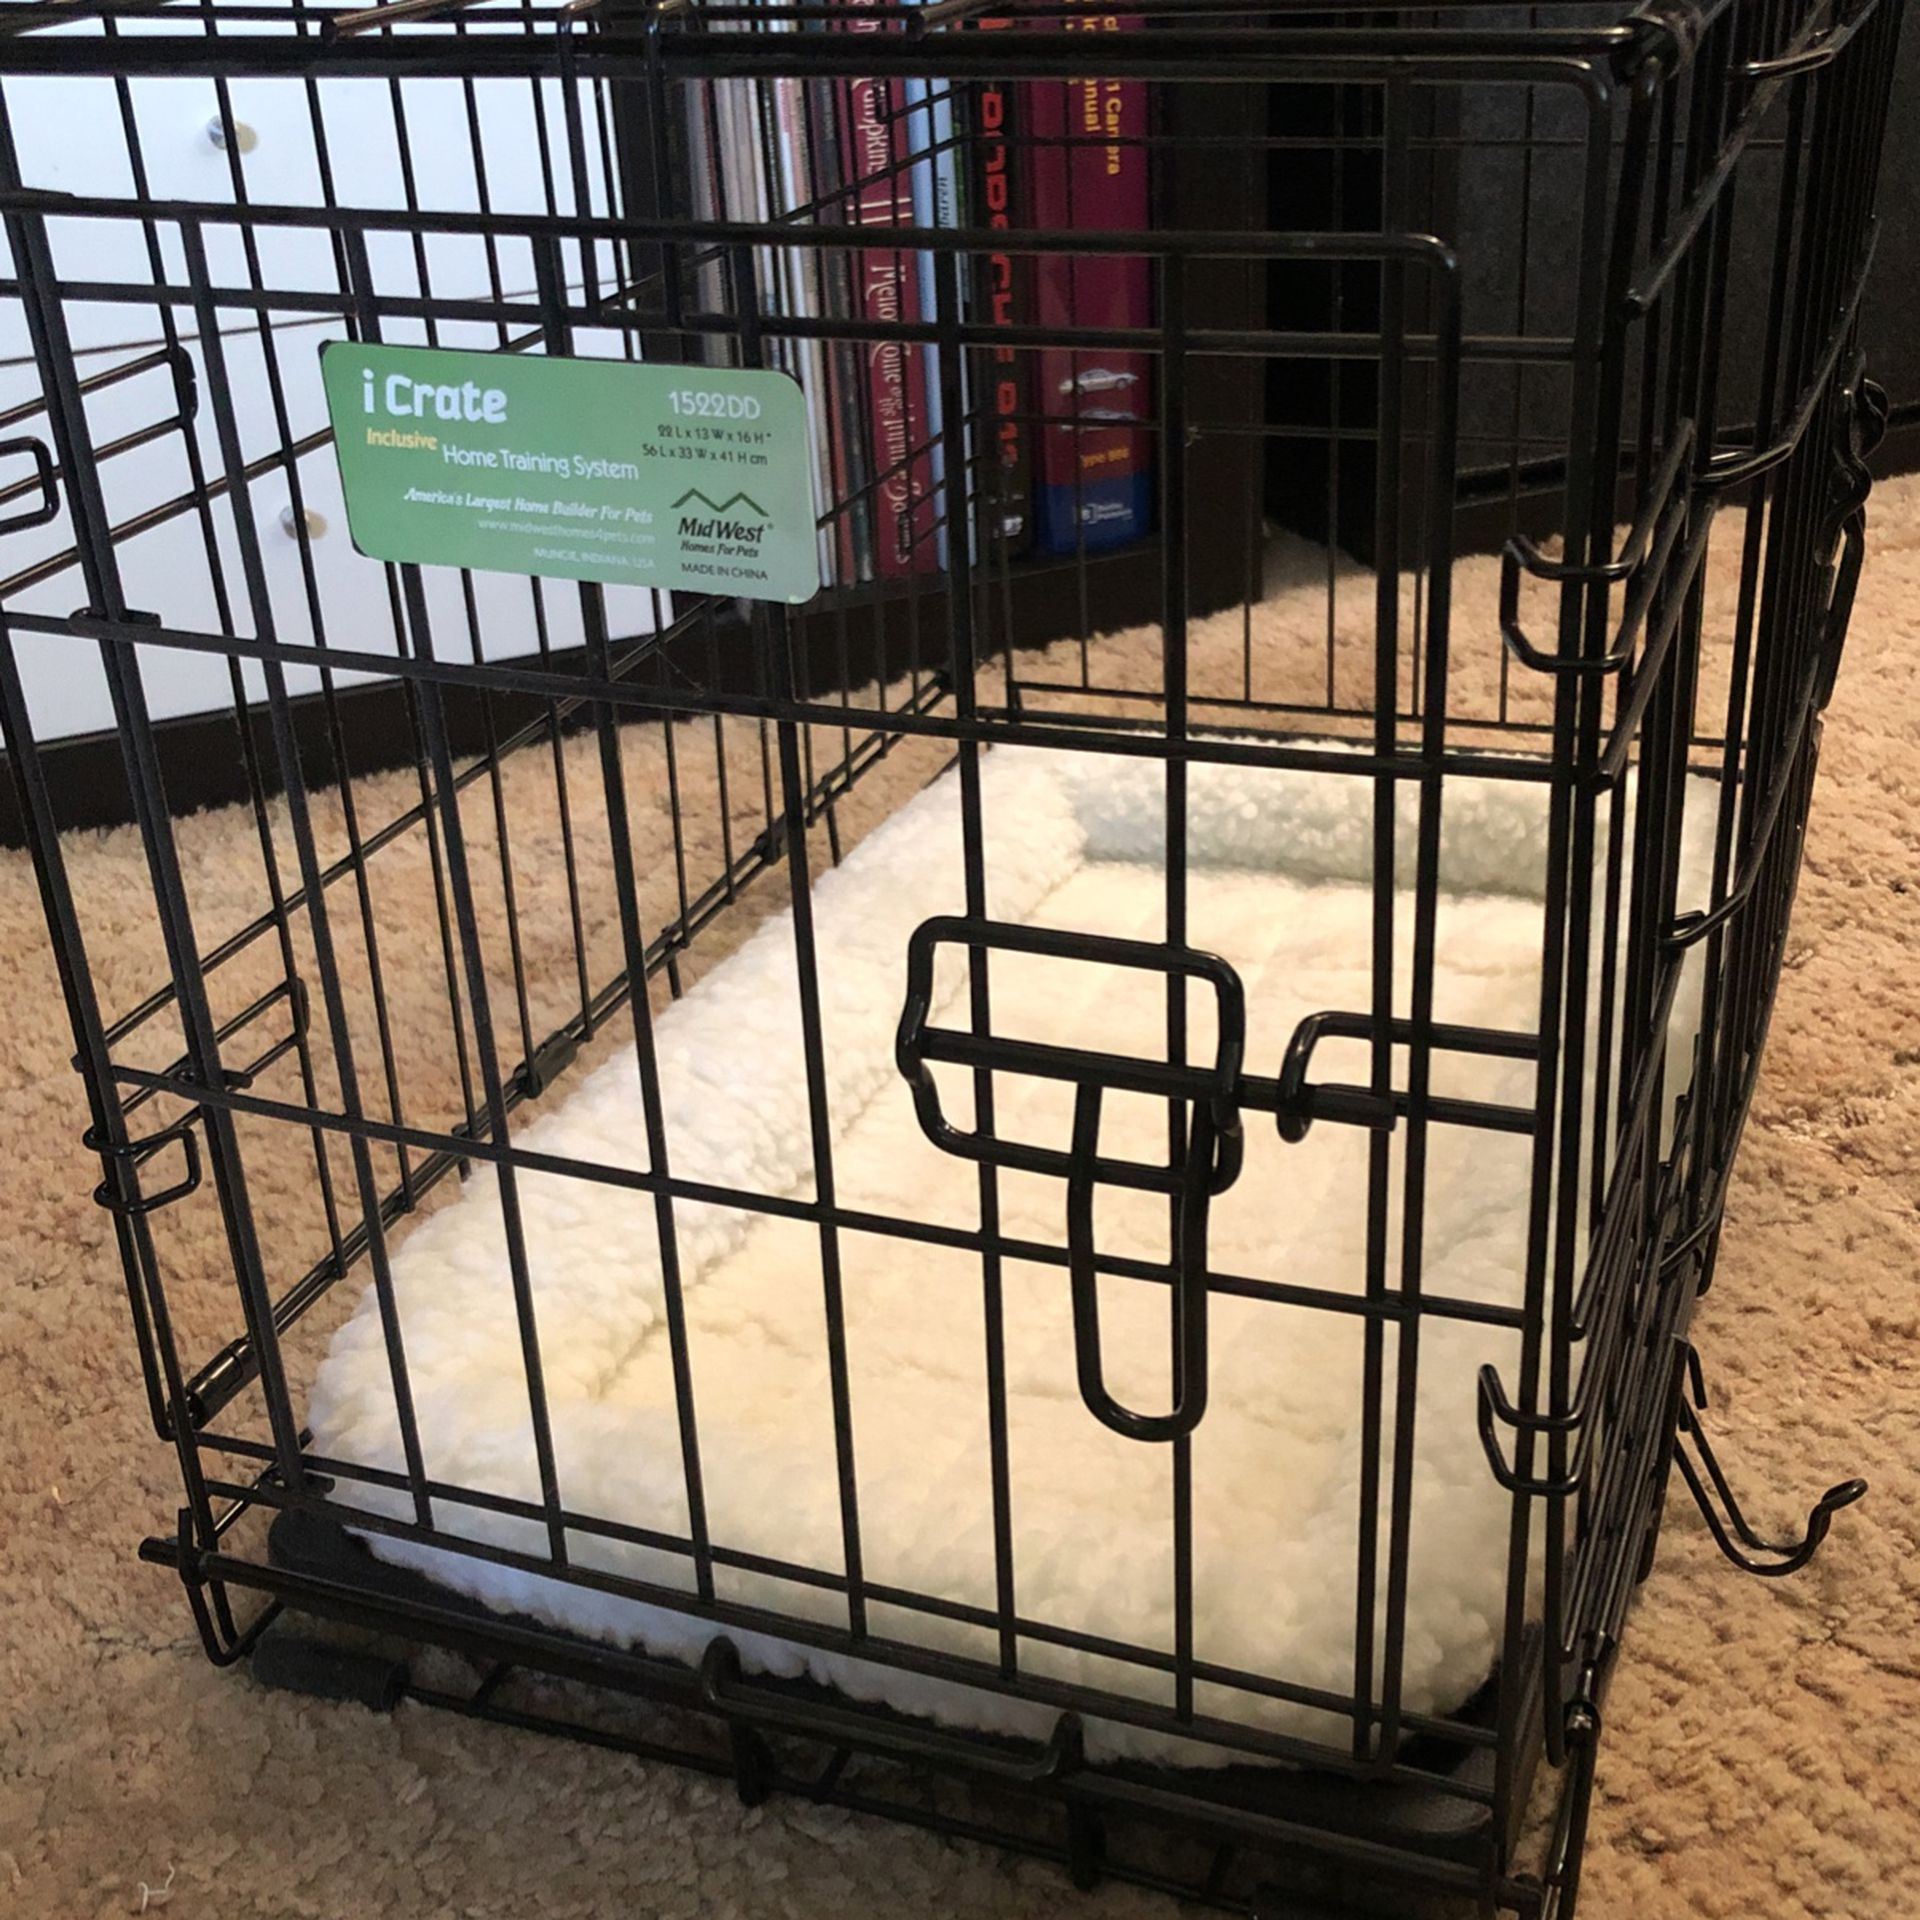 iCrate Puppy Kennel